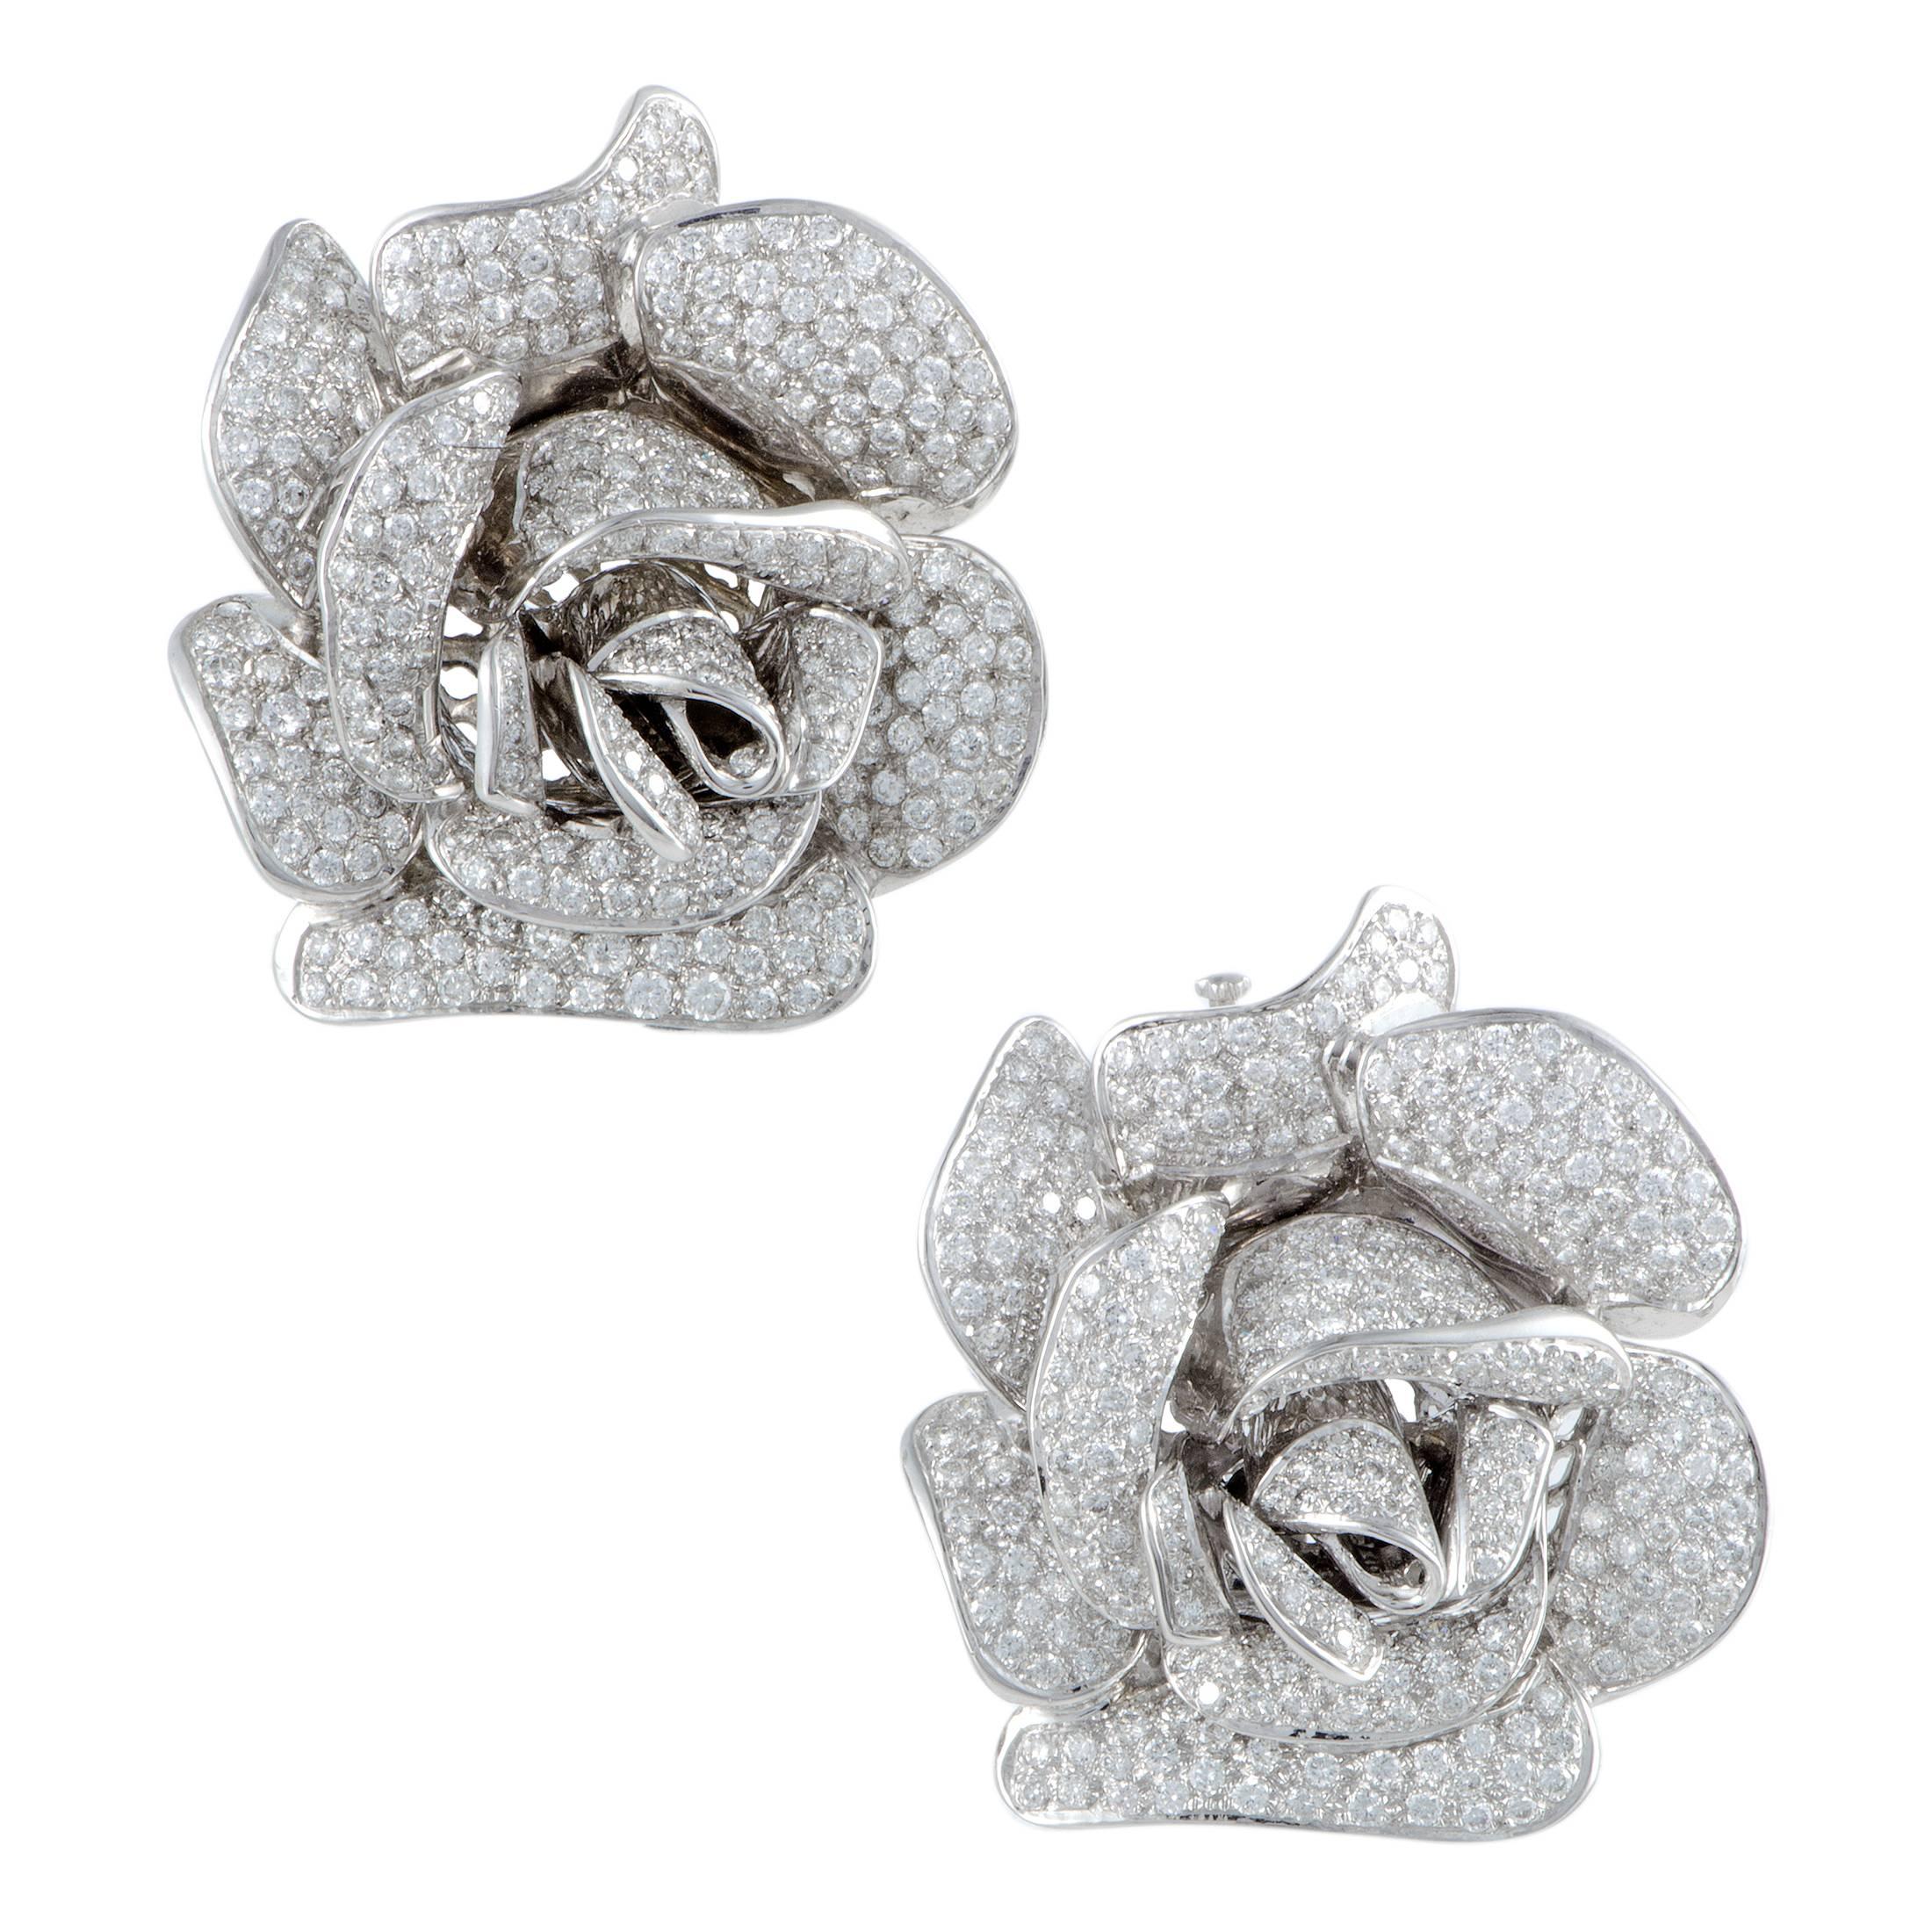 Accentuate your look in a spectacularly luxurious manner with this fabulous set that boasts a splendidly feminine design and exceptional craftsmanship quality. Made of 18K white gold, the set includes two brooches and a pair of earrings, and it is